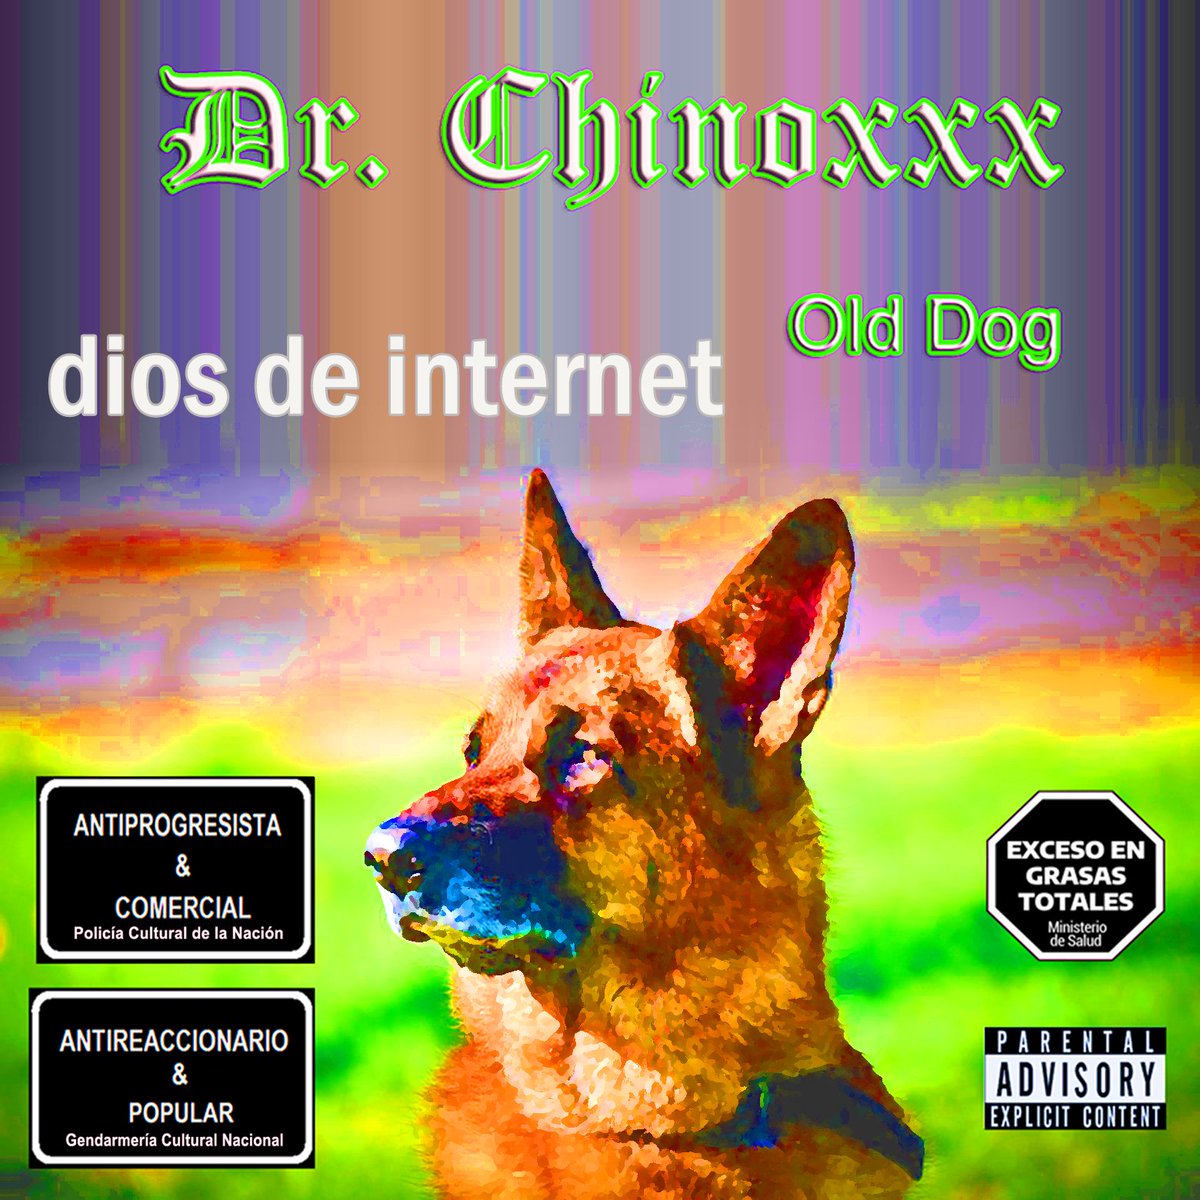 Dr. Chinoxxx's #NewSingle          

DIOS de INTERNET #ESTRENO #OUTTODAY        

12:15 Argentina       
04:15 Madrid        
07:15 Los Angeles (CA)              

Exclusive on @YouTube

#TrapMusic #HipHopMusic #ProgressiveHouse #NewMusic #SubscribeNow

lc.cx/4UxFXi